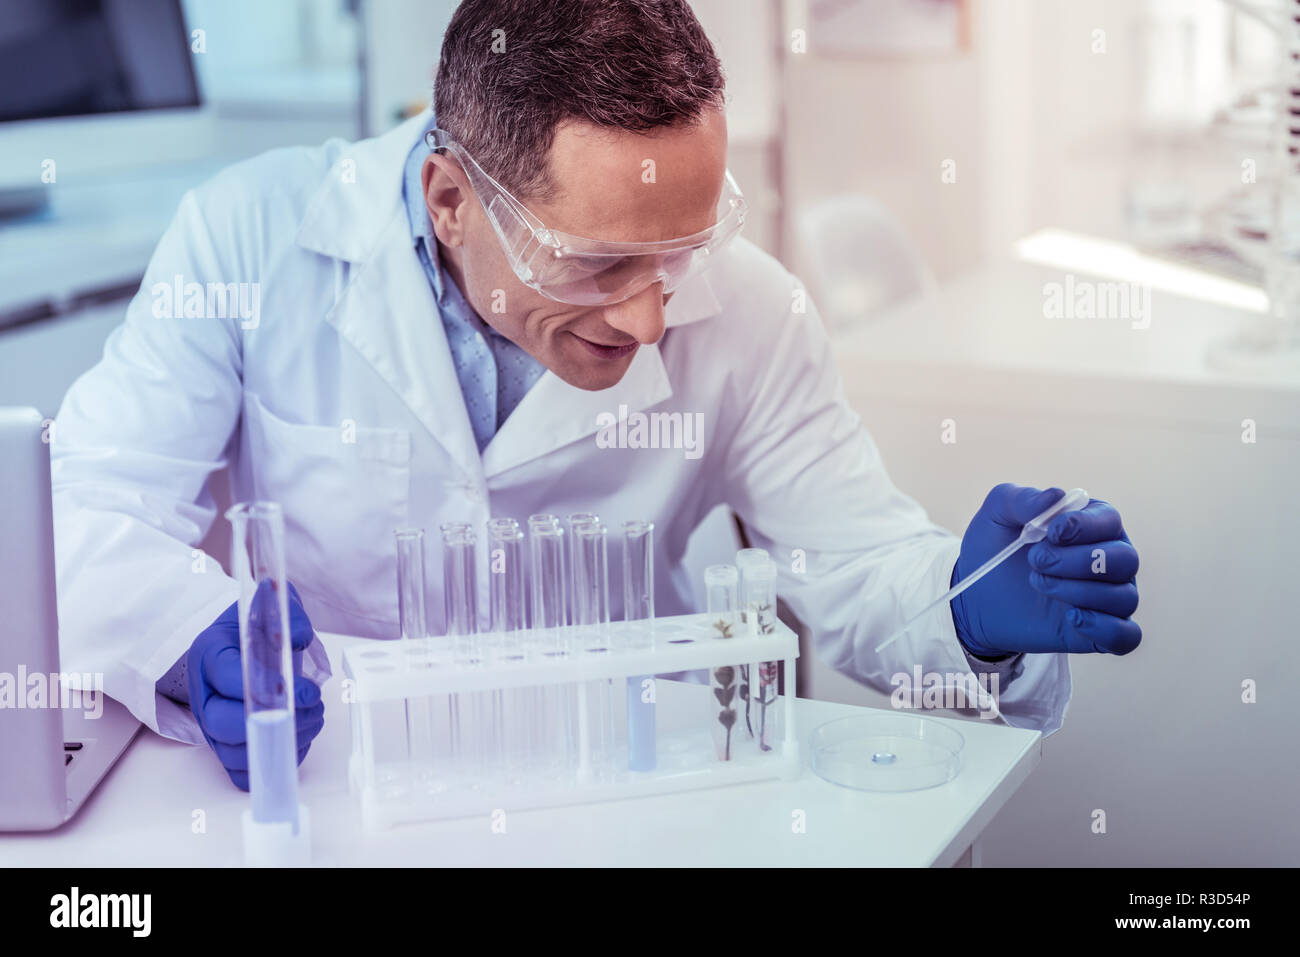 Scientific research. Cheerful medical worker keeping smile on his face while working in laboratory Stock Photo